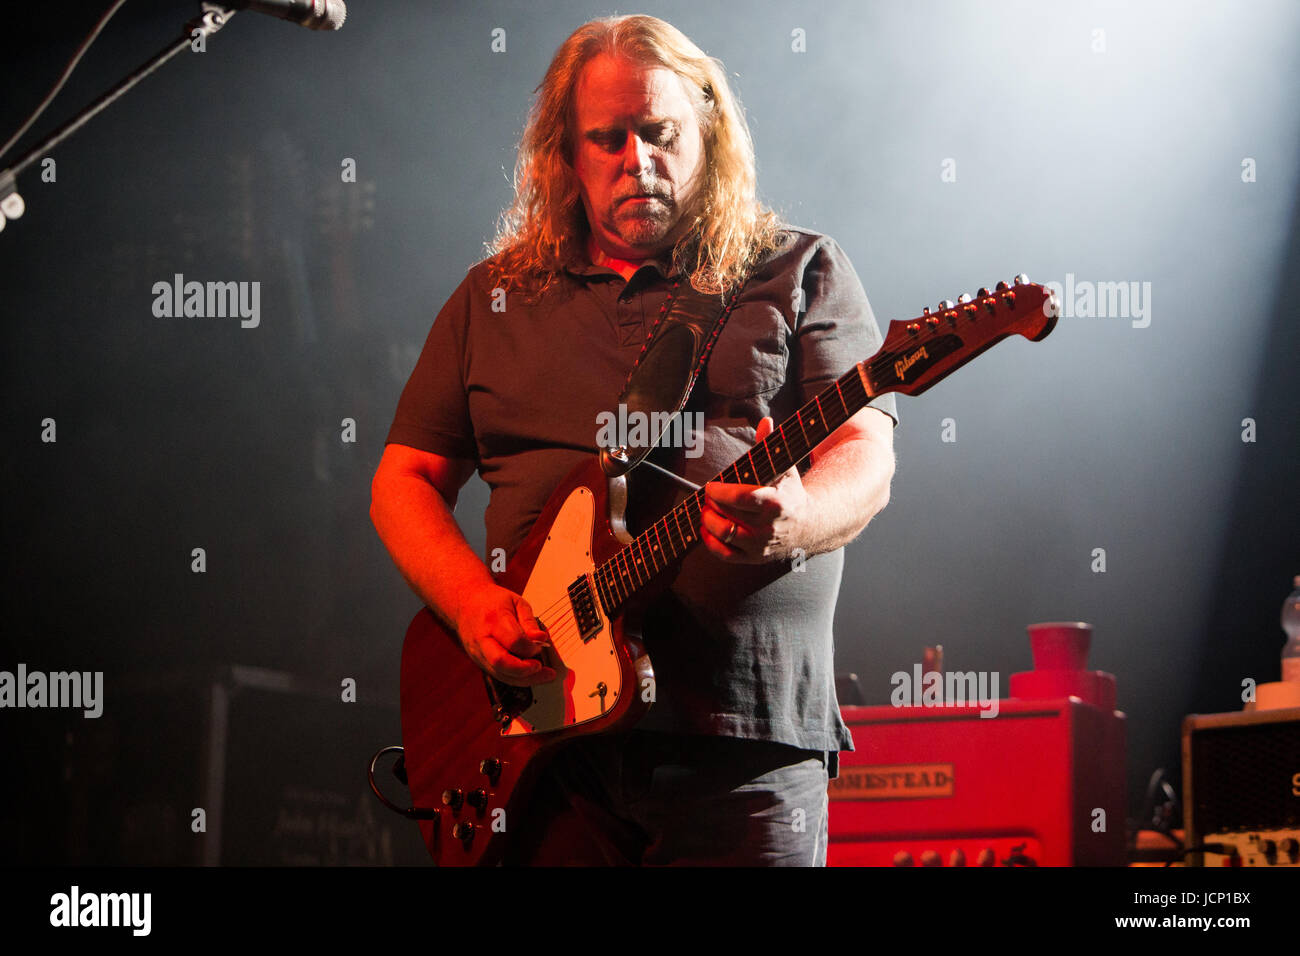 Trezzo sull'Adda, Italy. 15th June, 2017. The American southern rock jam band GOV'T MULE performs live on stage at Live Music Club to present their new album 'Revolution Come.Revolution Go' Credit: Rodolfo Sassano/Alamy Live News Stock Photo